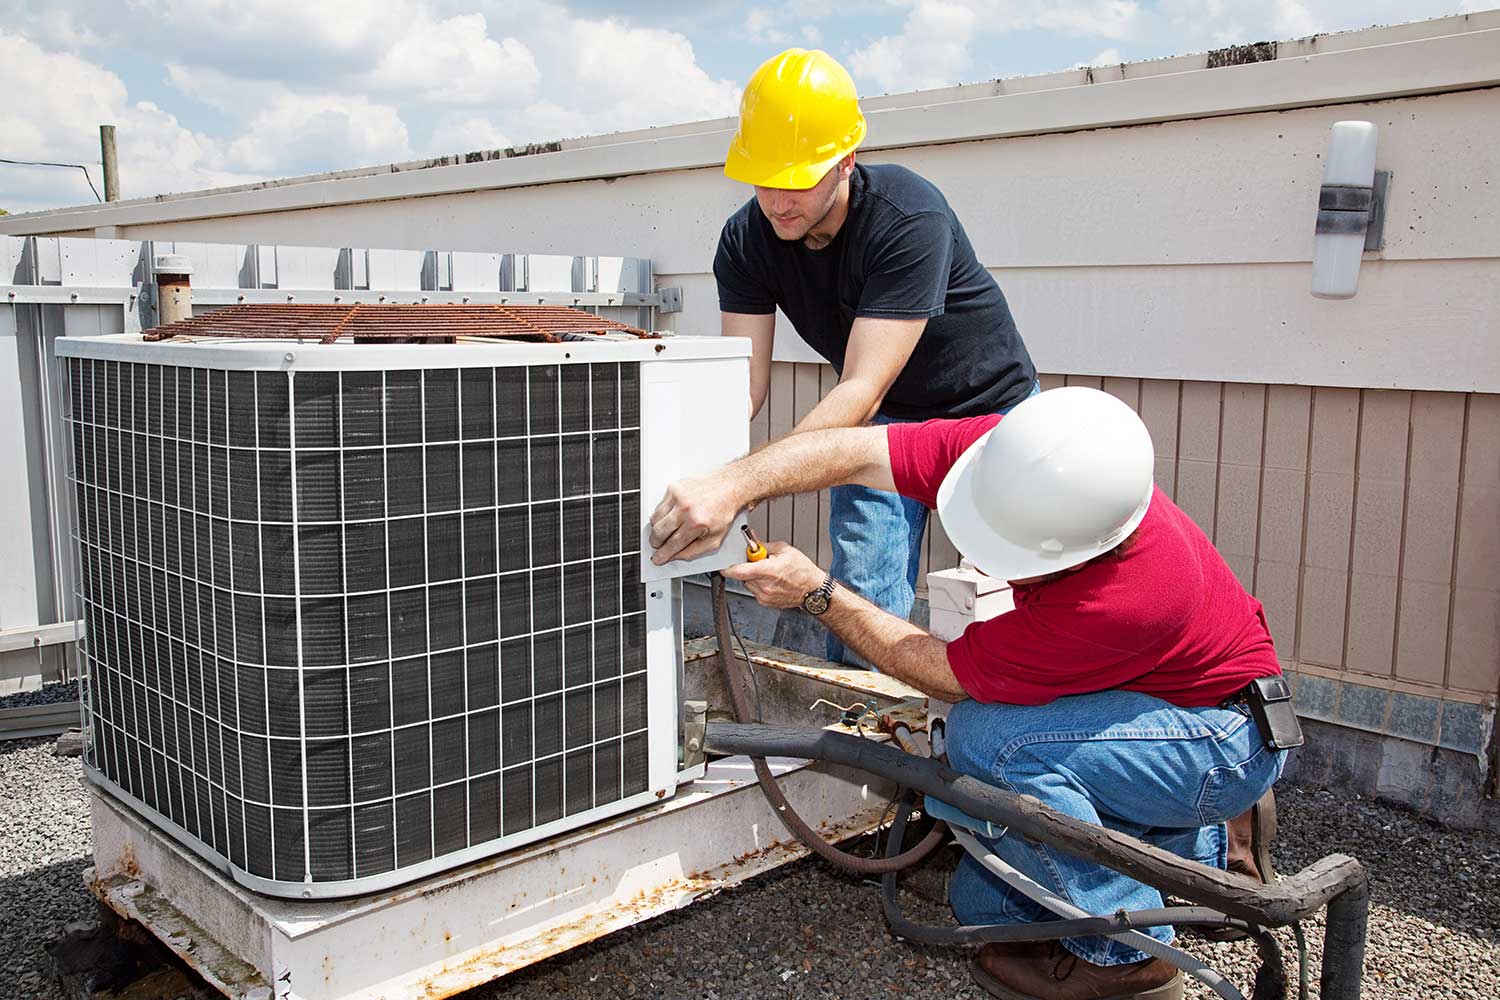 Freon in an a/c unit